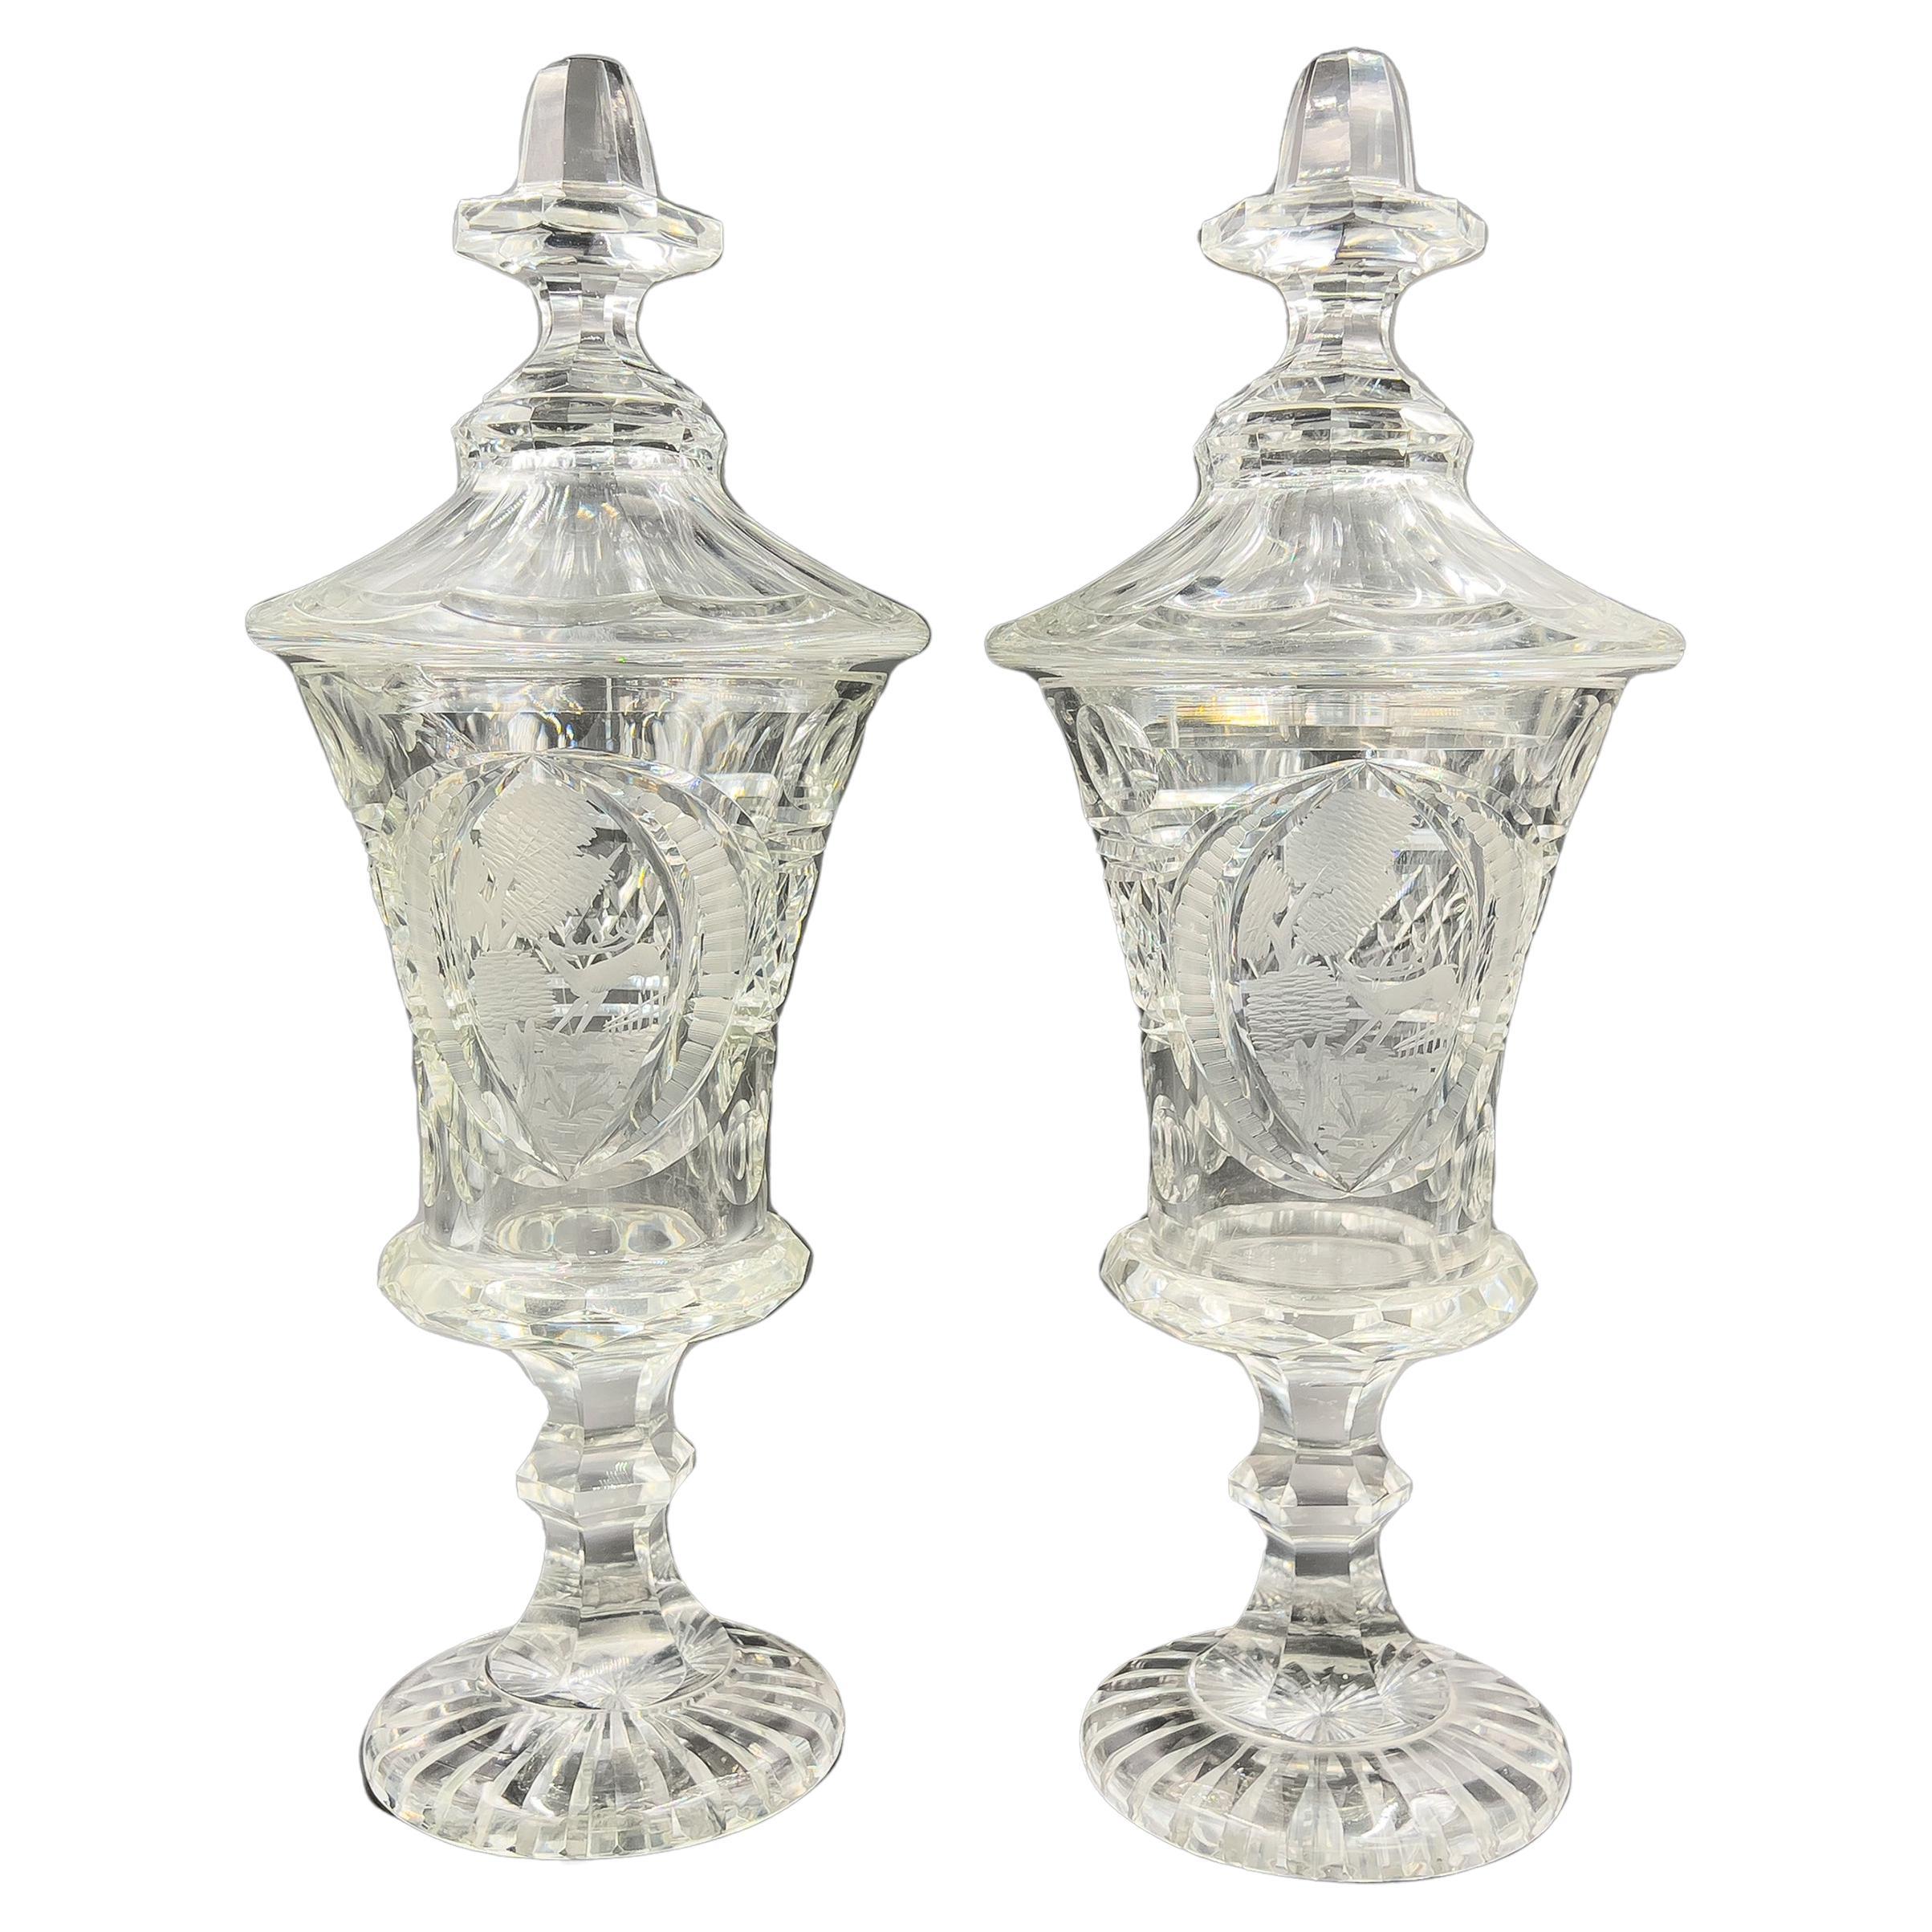 Fine Pair of Bohemian Cut and Etched Lidded Glass Vases, Late 19th/Early 20th 